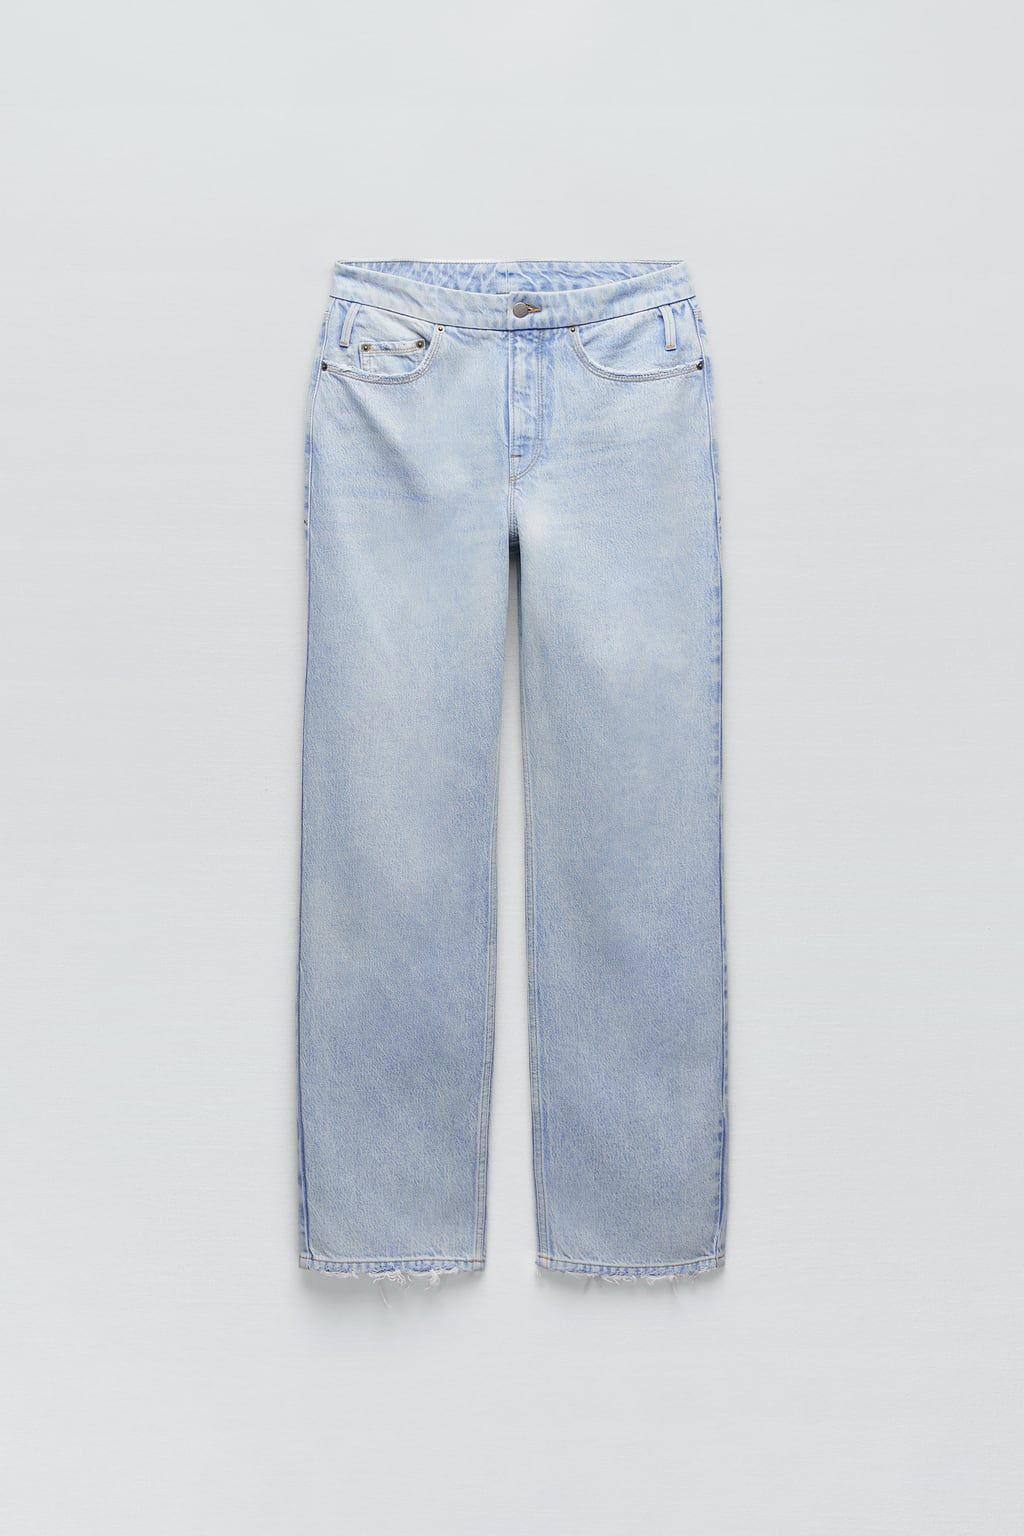 https://flyfiercefab.com/wp-content/uploads/2022/05/Good-American-X-Zara-90s-Relaxed-Jeans.png